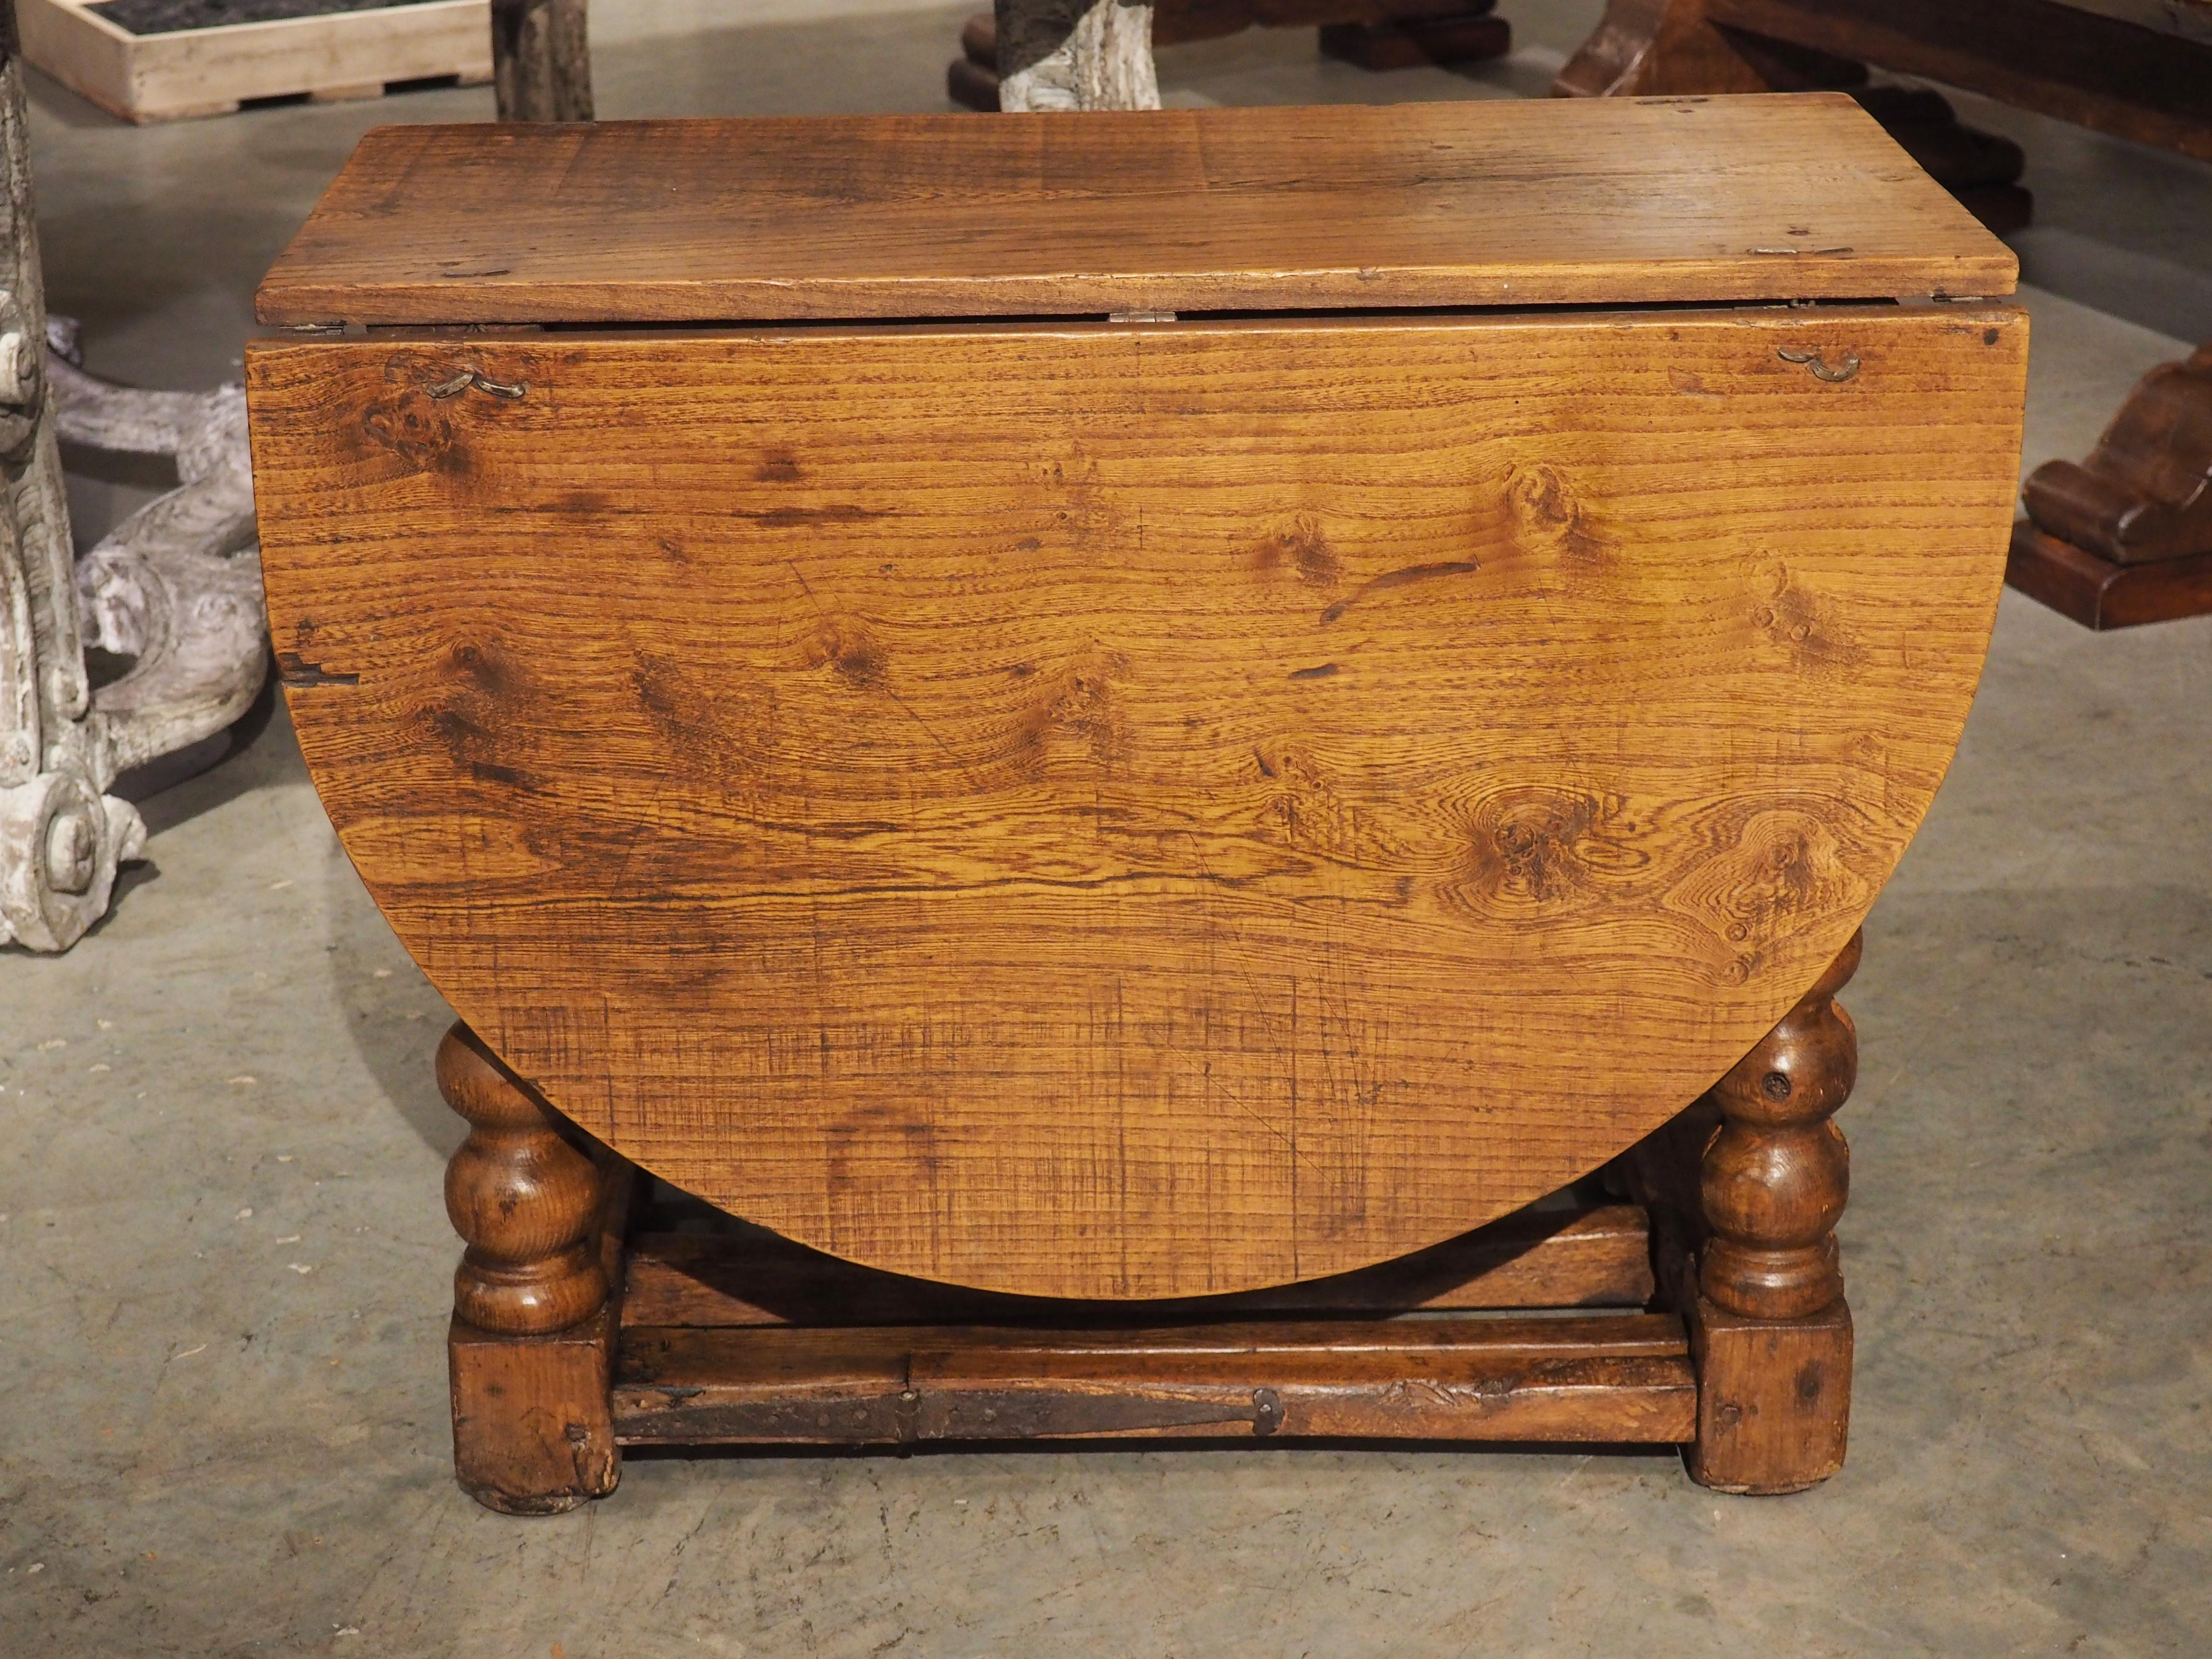 18th Century and Earlier 17th Century Oval Gate Leg Table from England